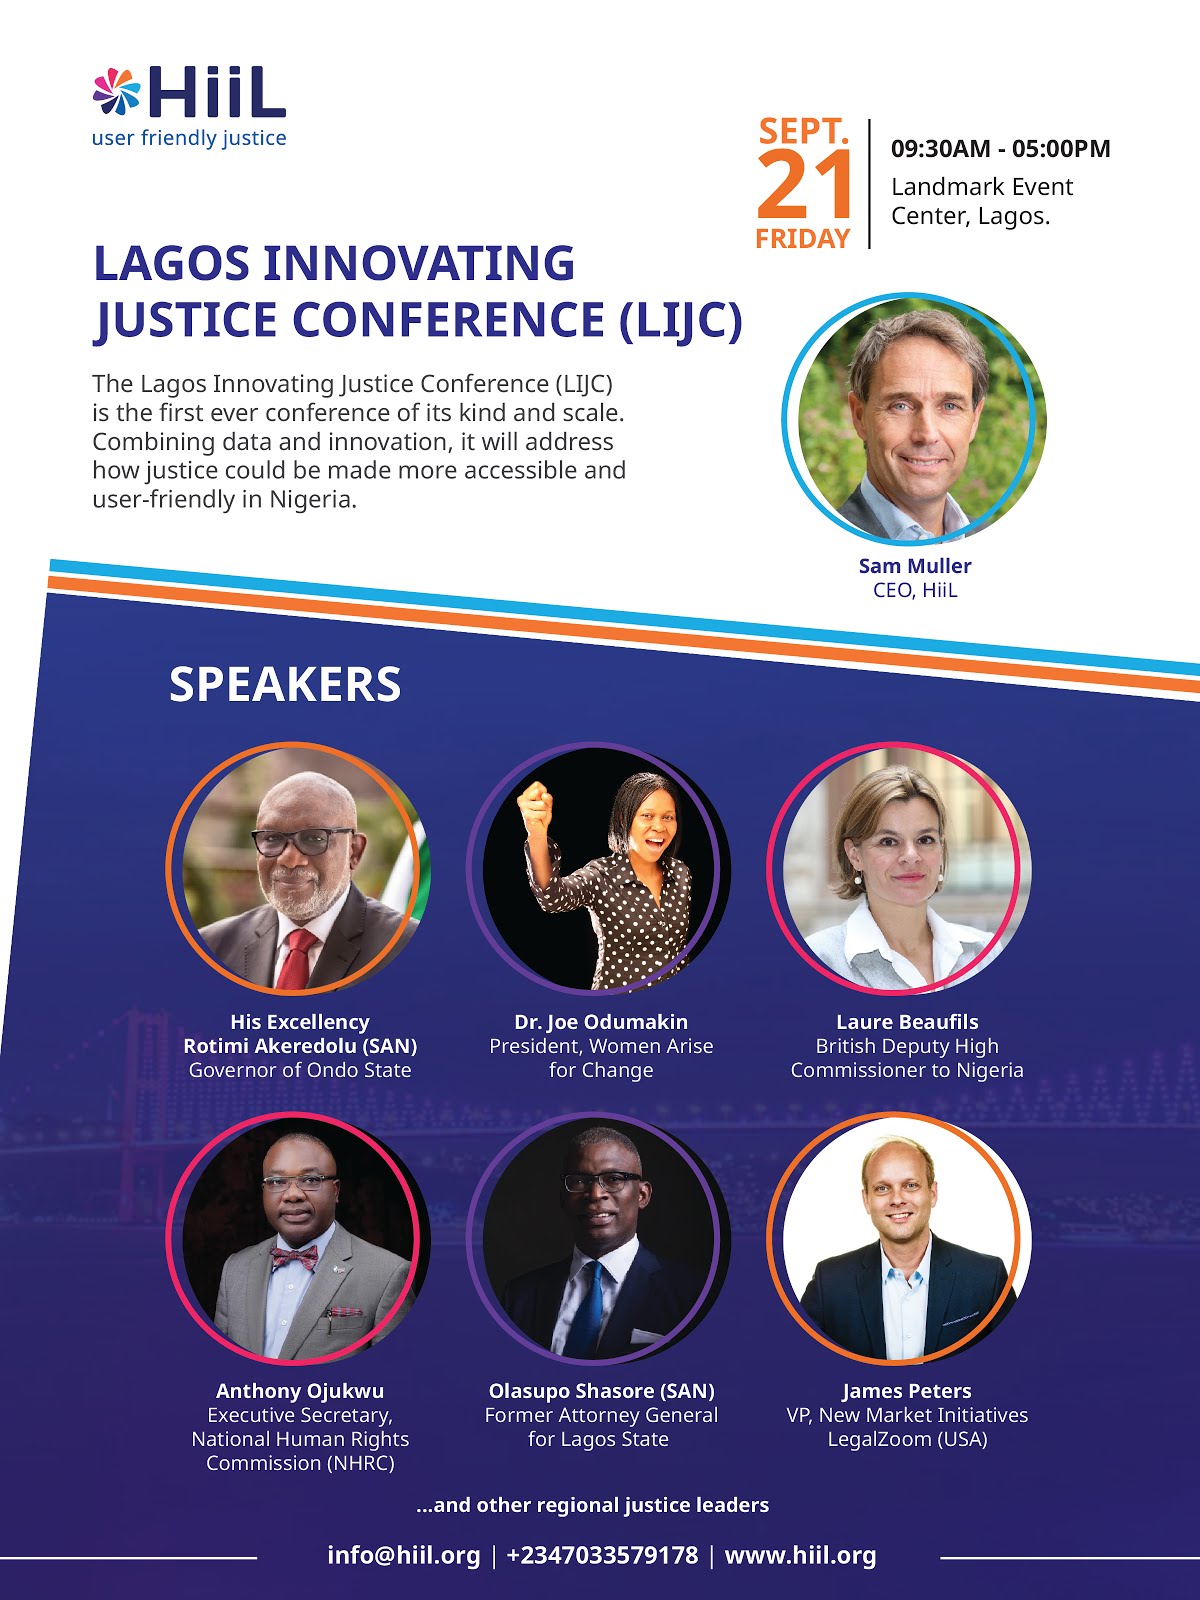 Join Us At The Lagos Justice Innovating Conference

#LIJC2018